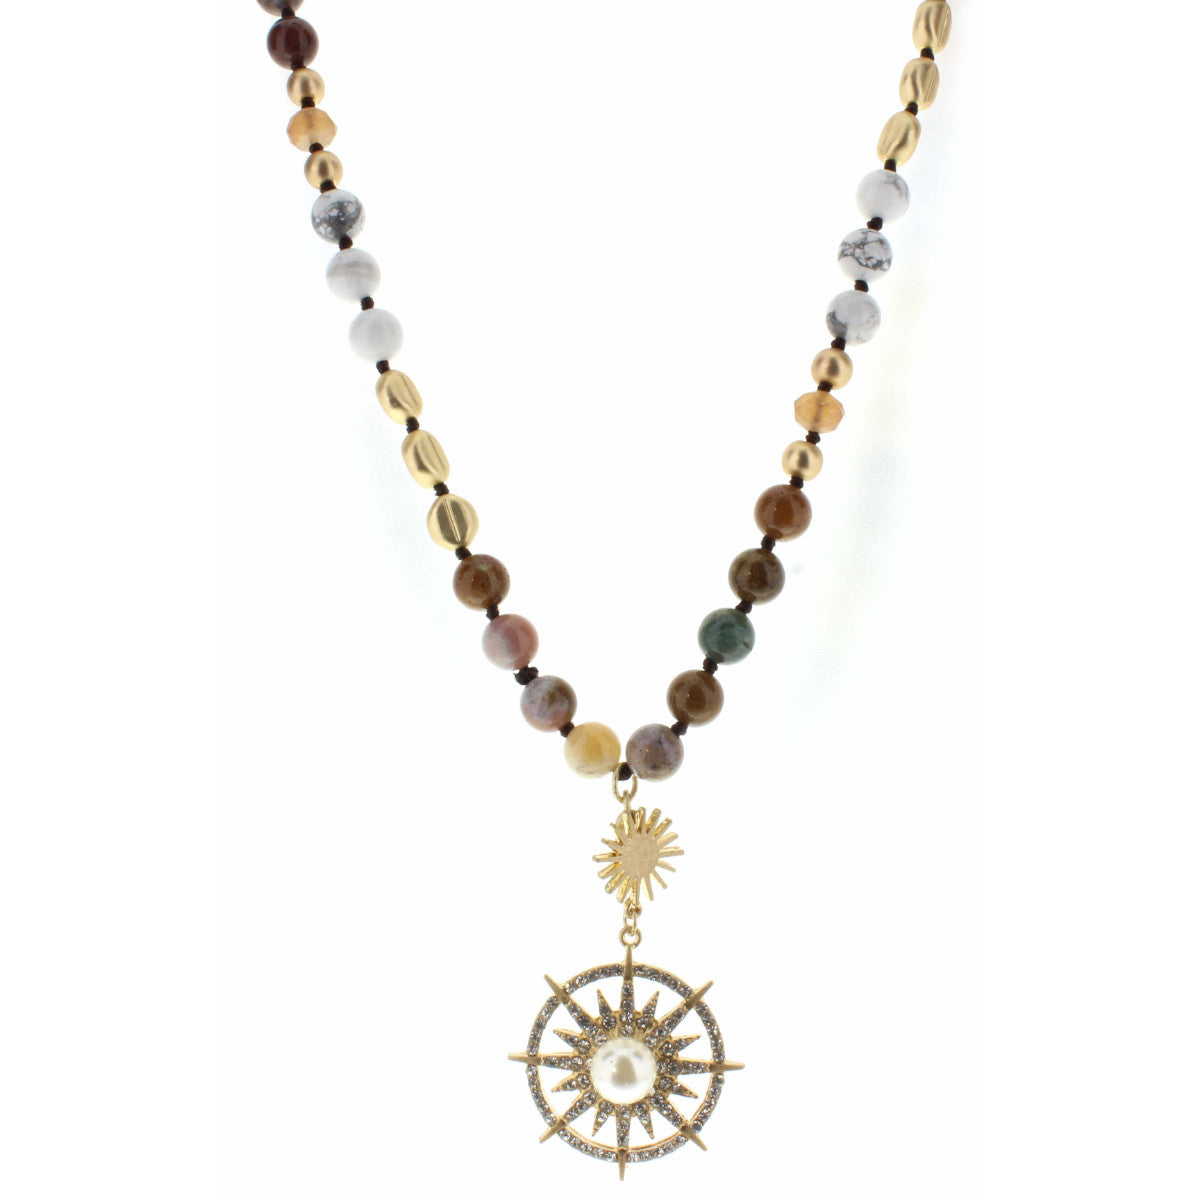 30" Tigers Eye Multi Beaded with Starburst, Pearl Accent Necklace